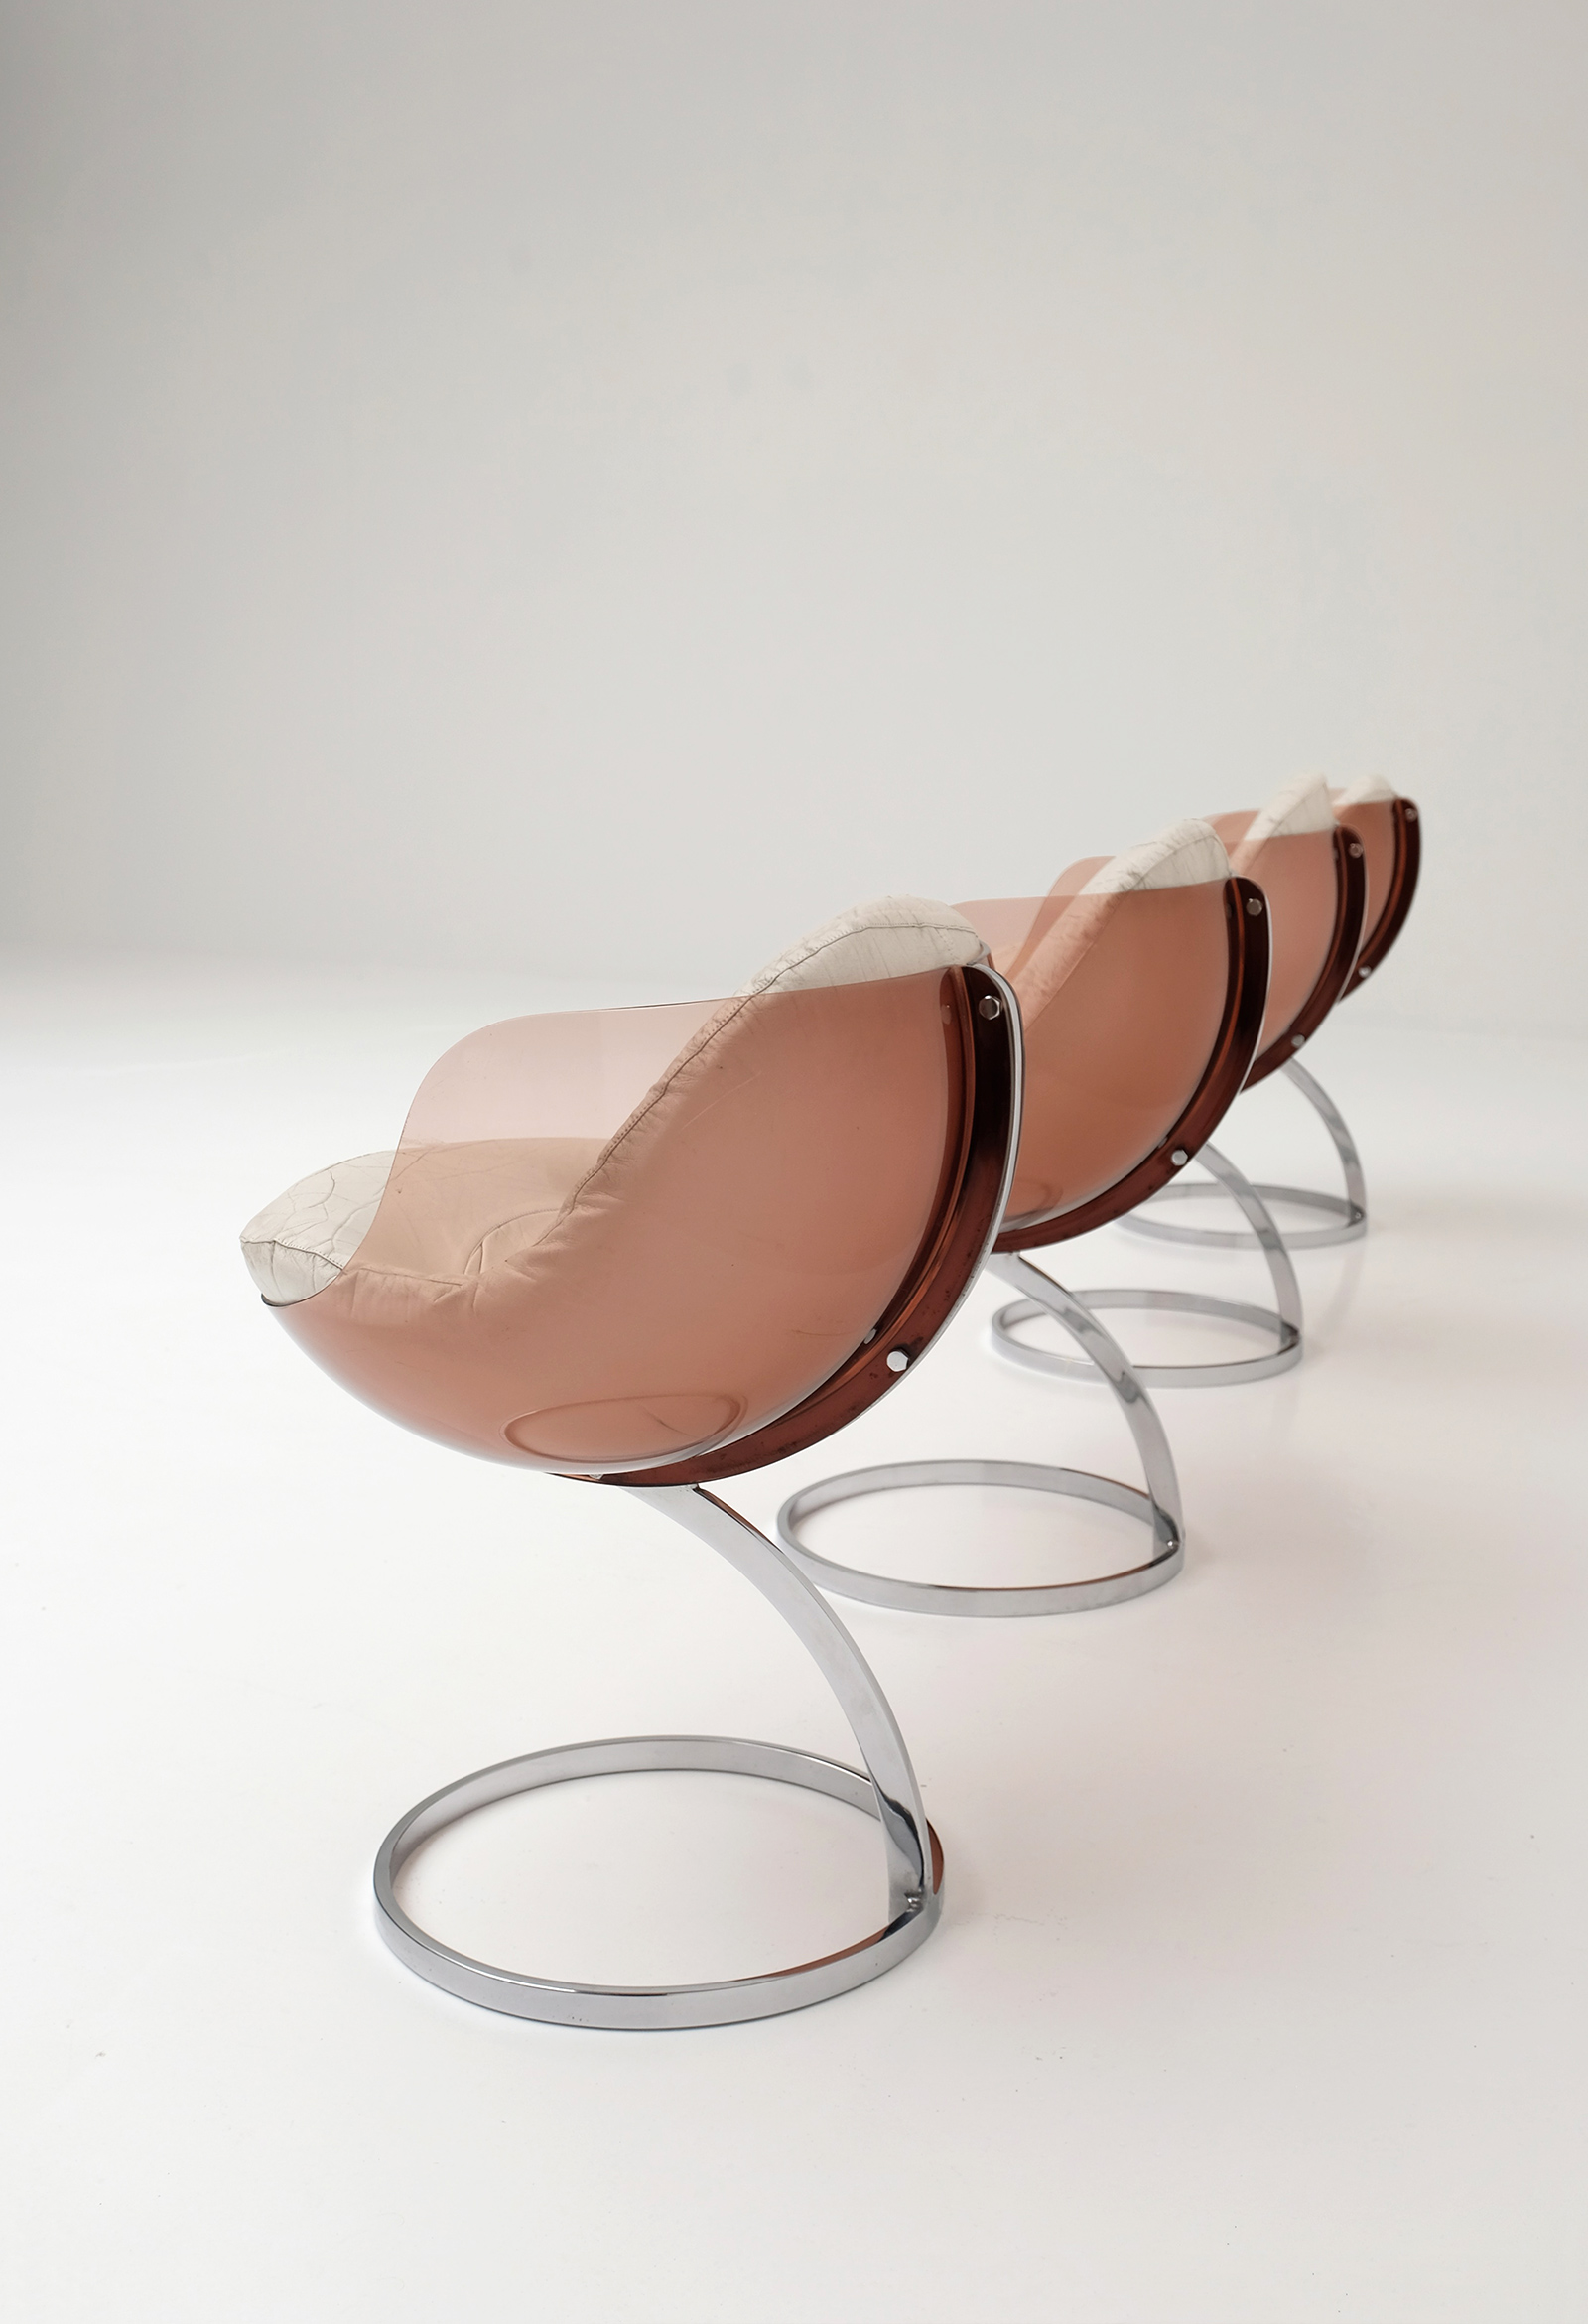 Boris Tabacoff Sphere Chairs Mobillier Modulaire Modernimage 2